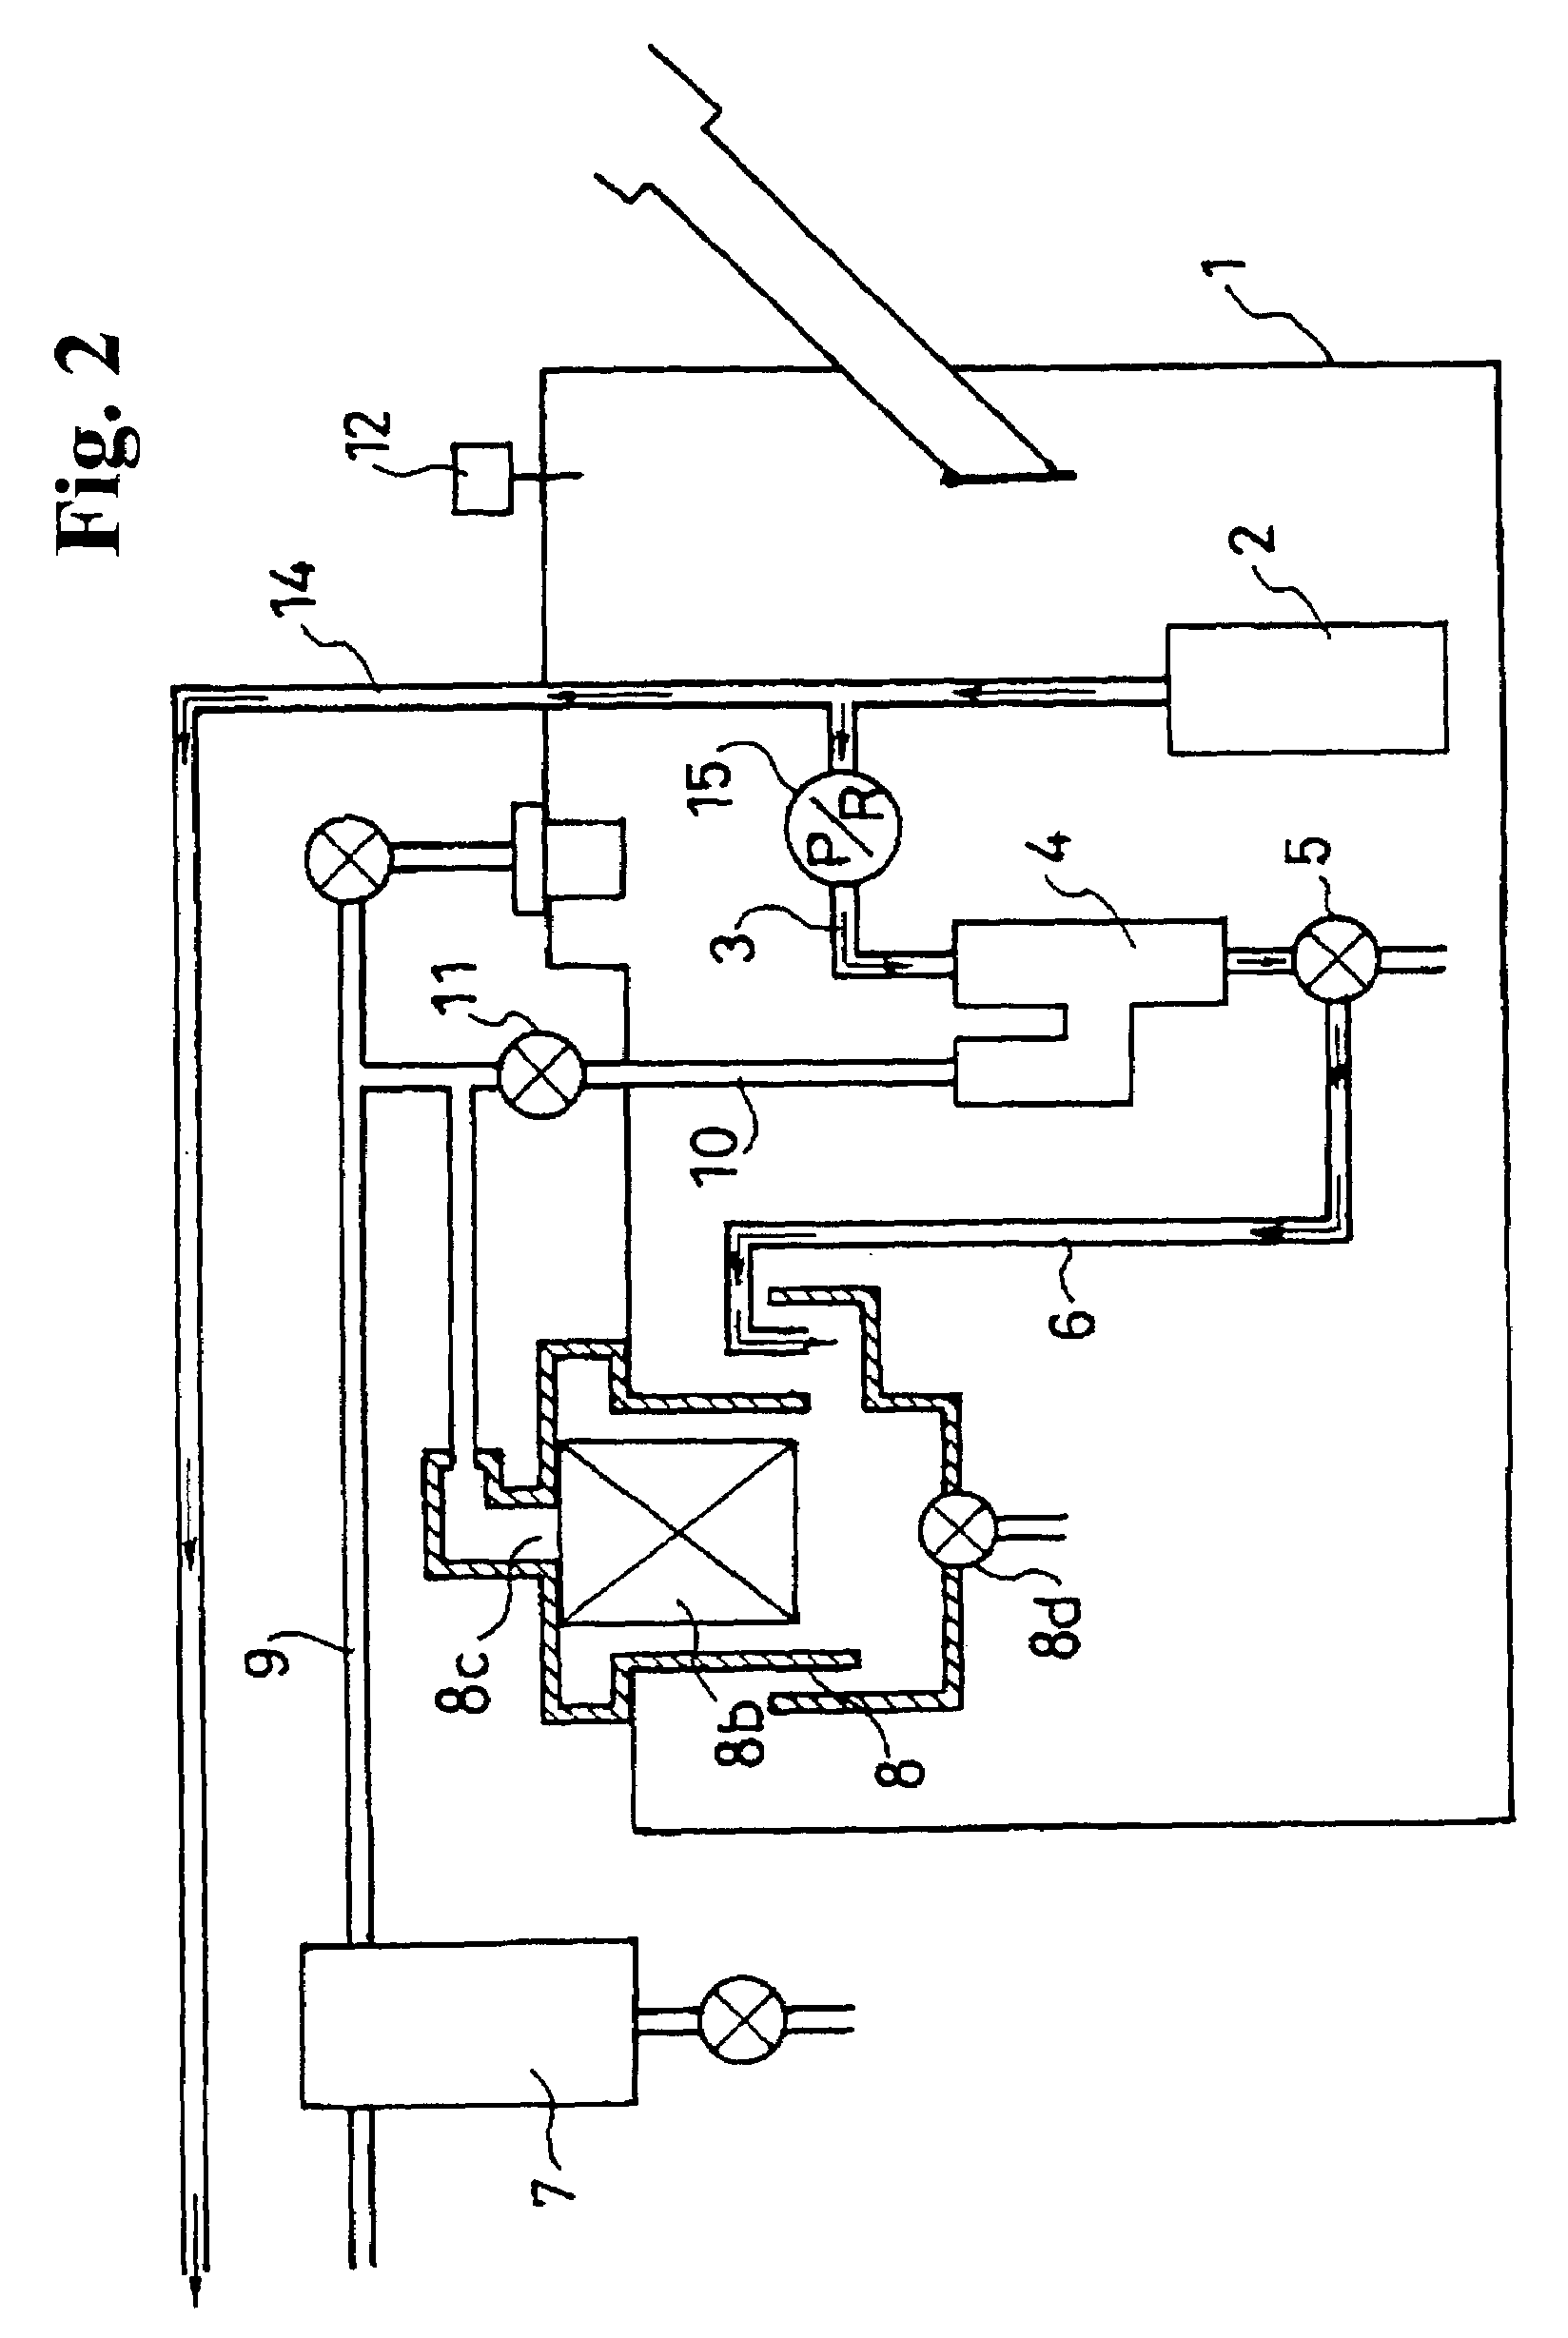 Fuel evaporation gas leakage detecting system and method of detecting fuel evaporation gas leakage